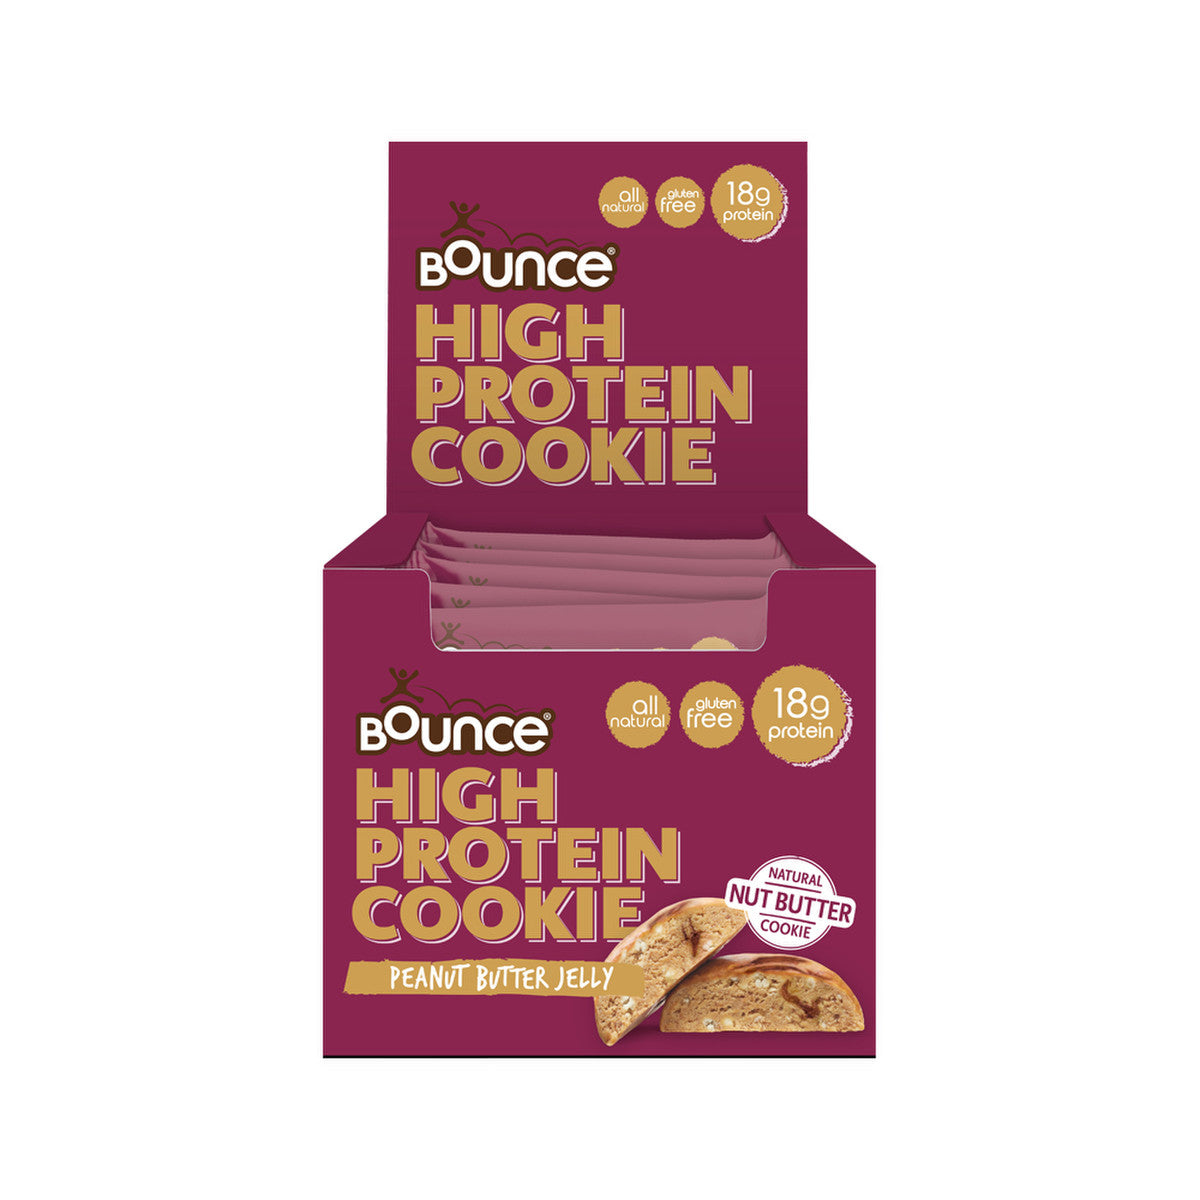 Bounce High Protein Cookie Peanut Butter Jelly 65g x 12 Display